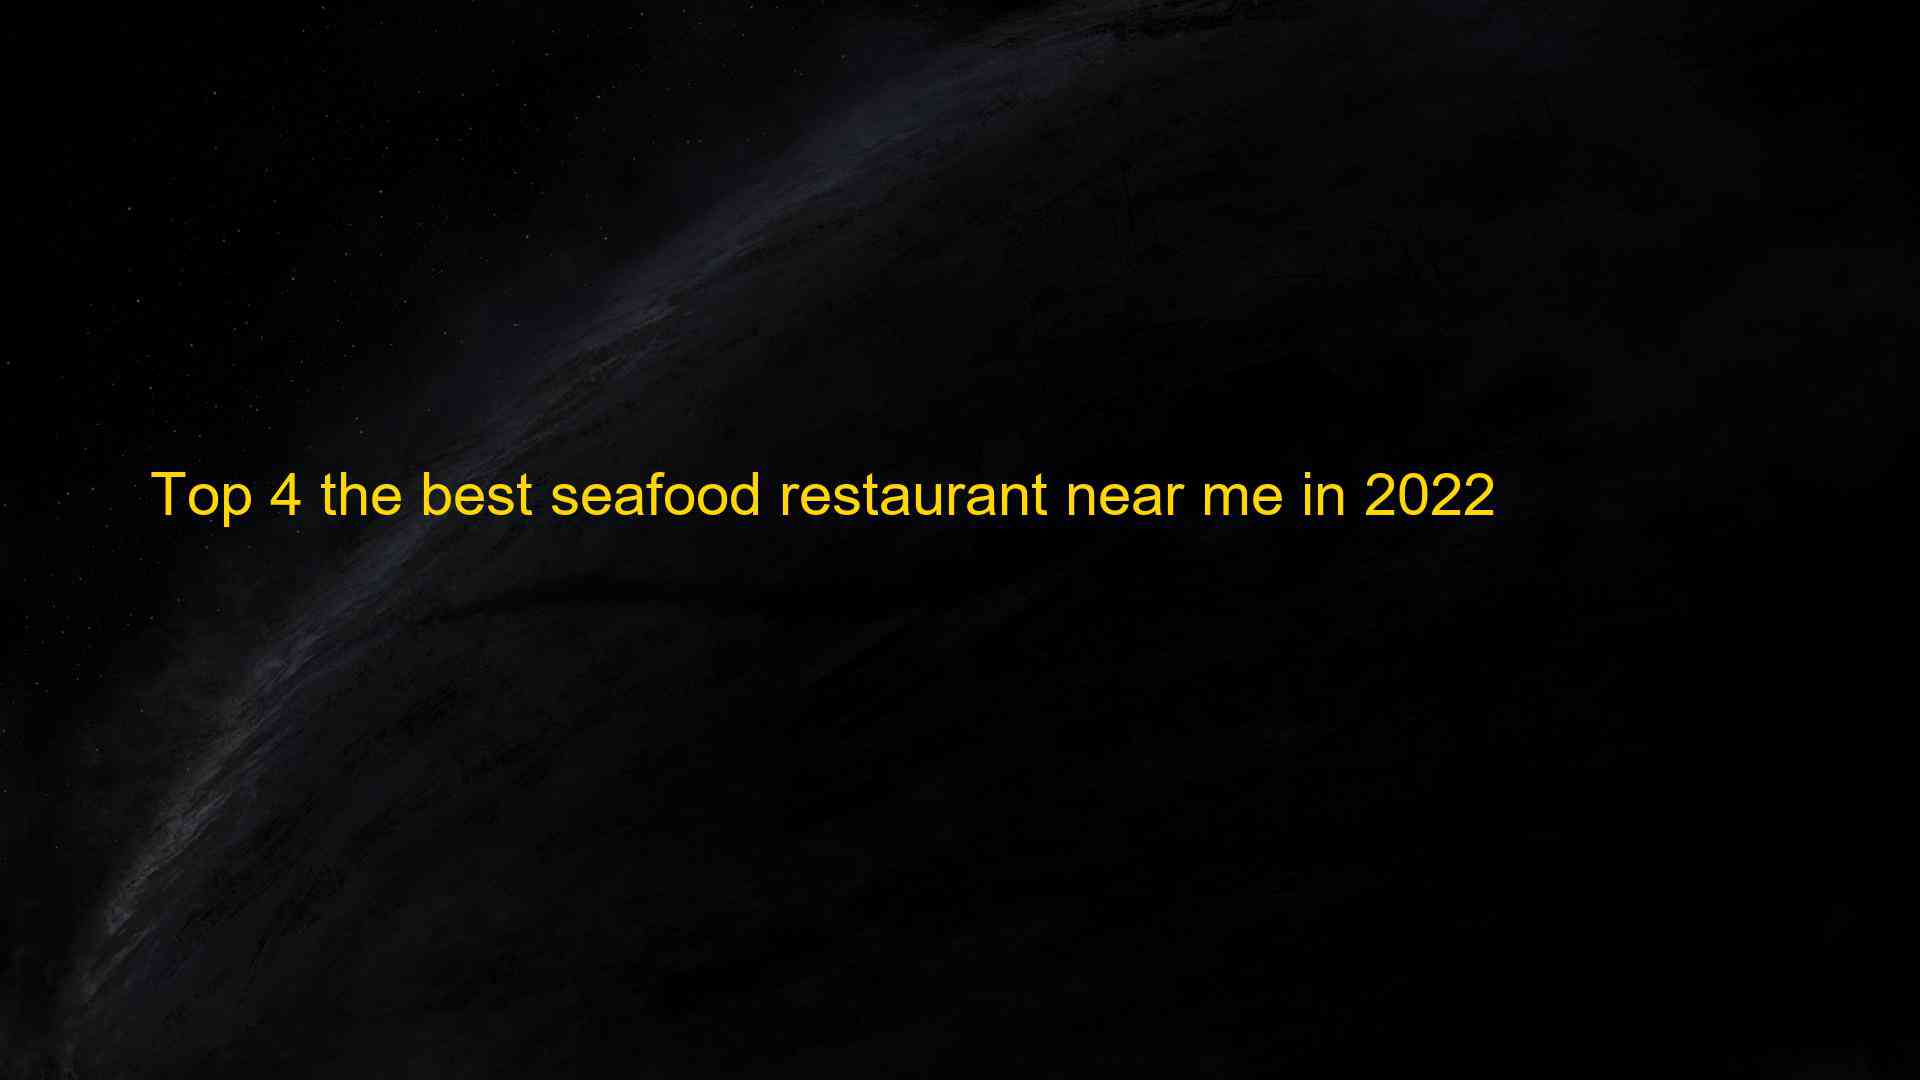 Top 4 the best seafood restaurant near me in 2022 1663389267